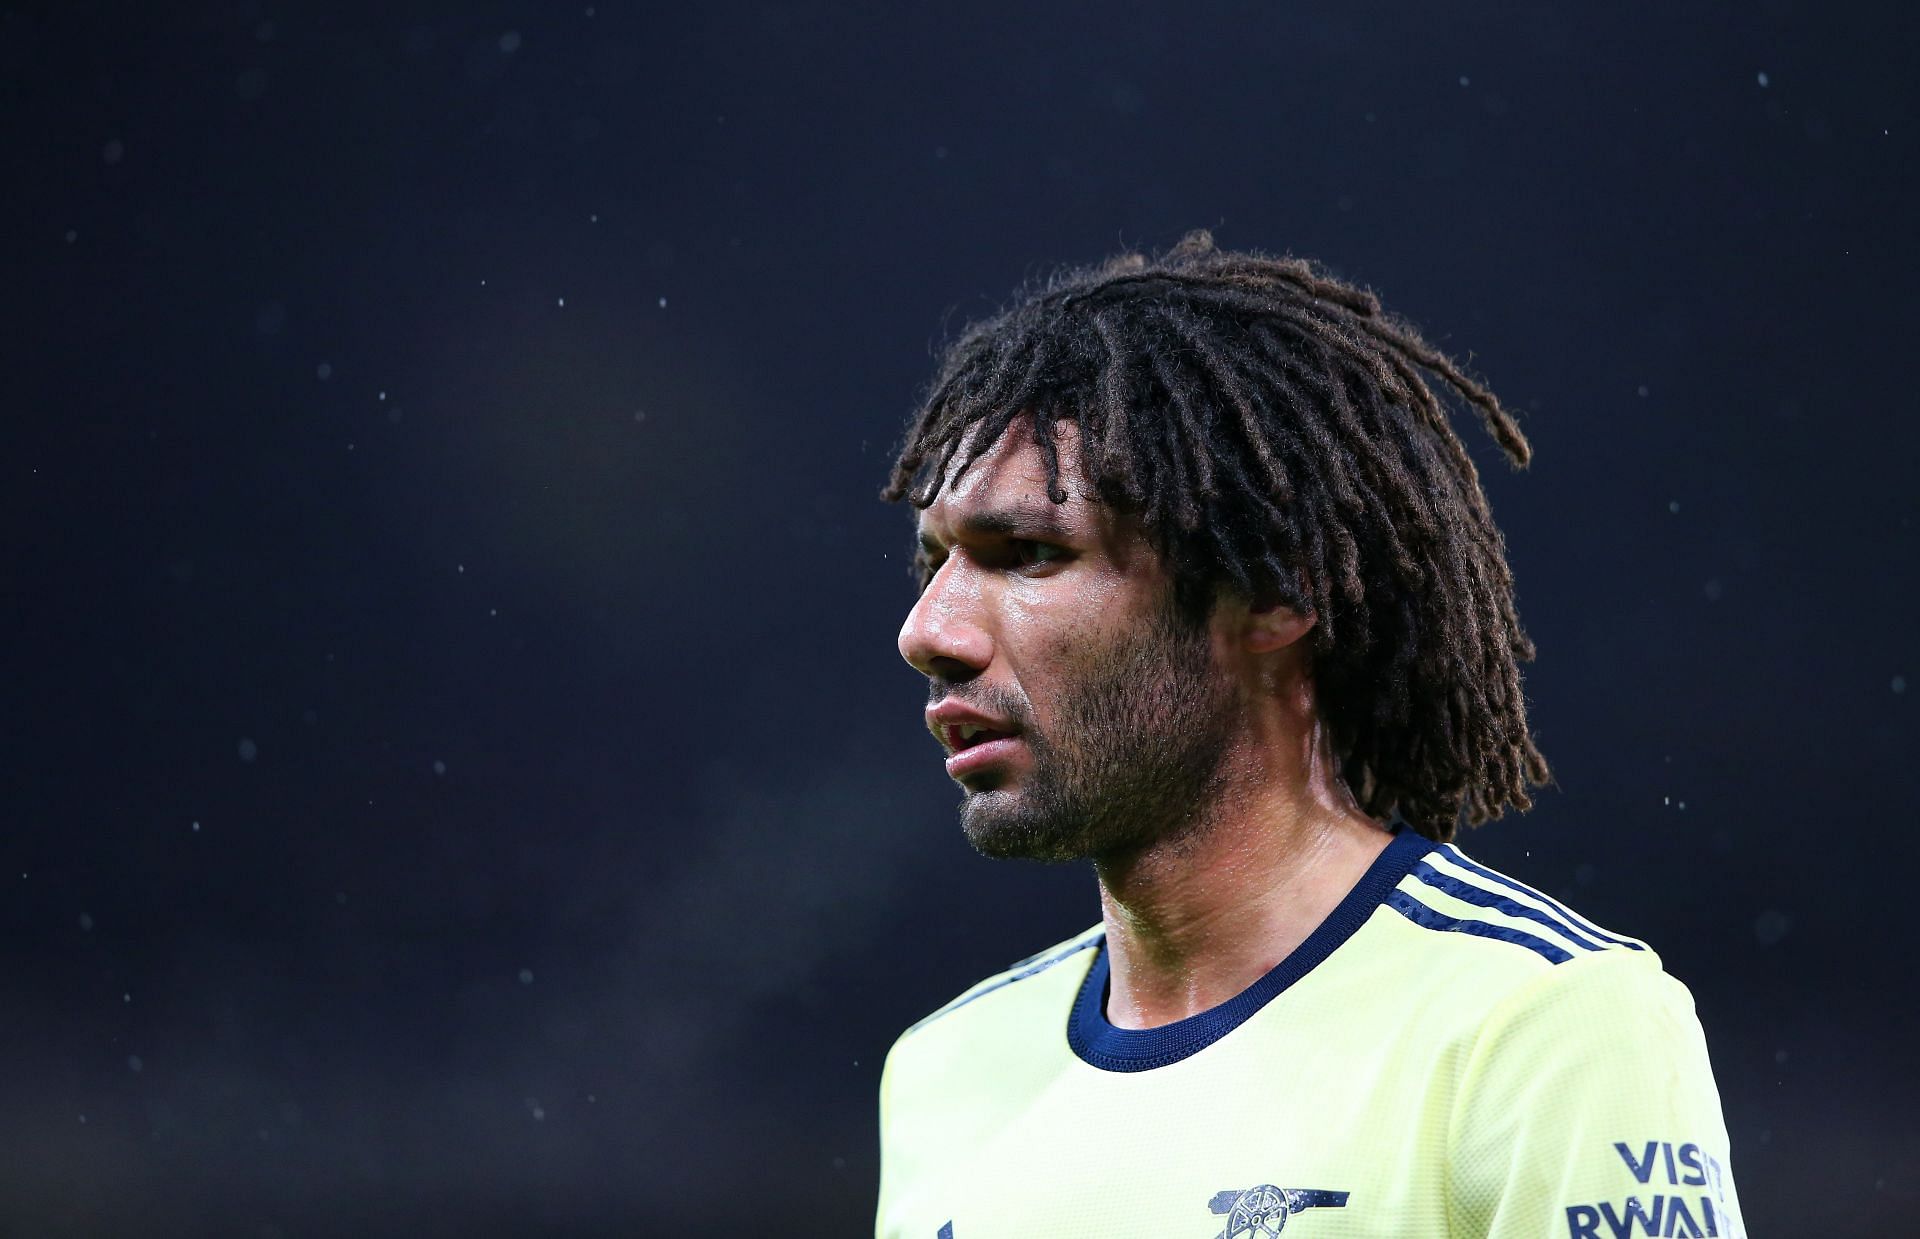 Arsenal rejected offers from quite a few clubs for Mohamed Elneny in January.